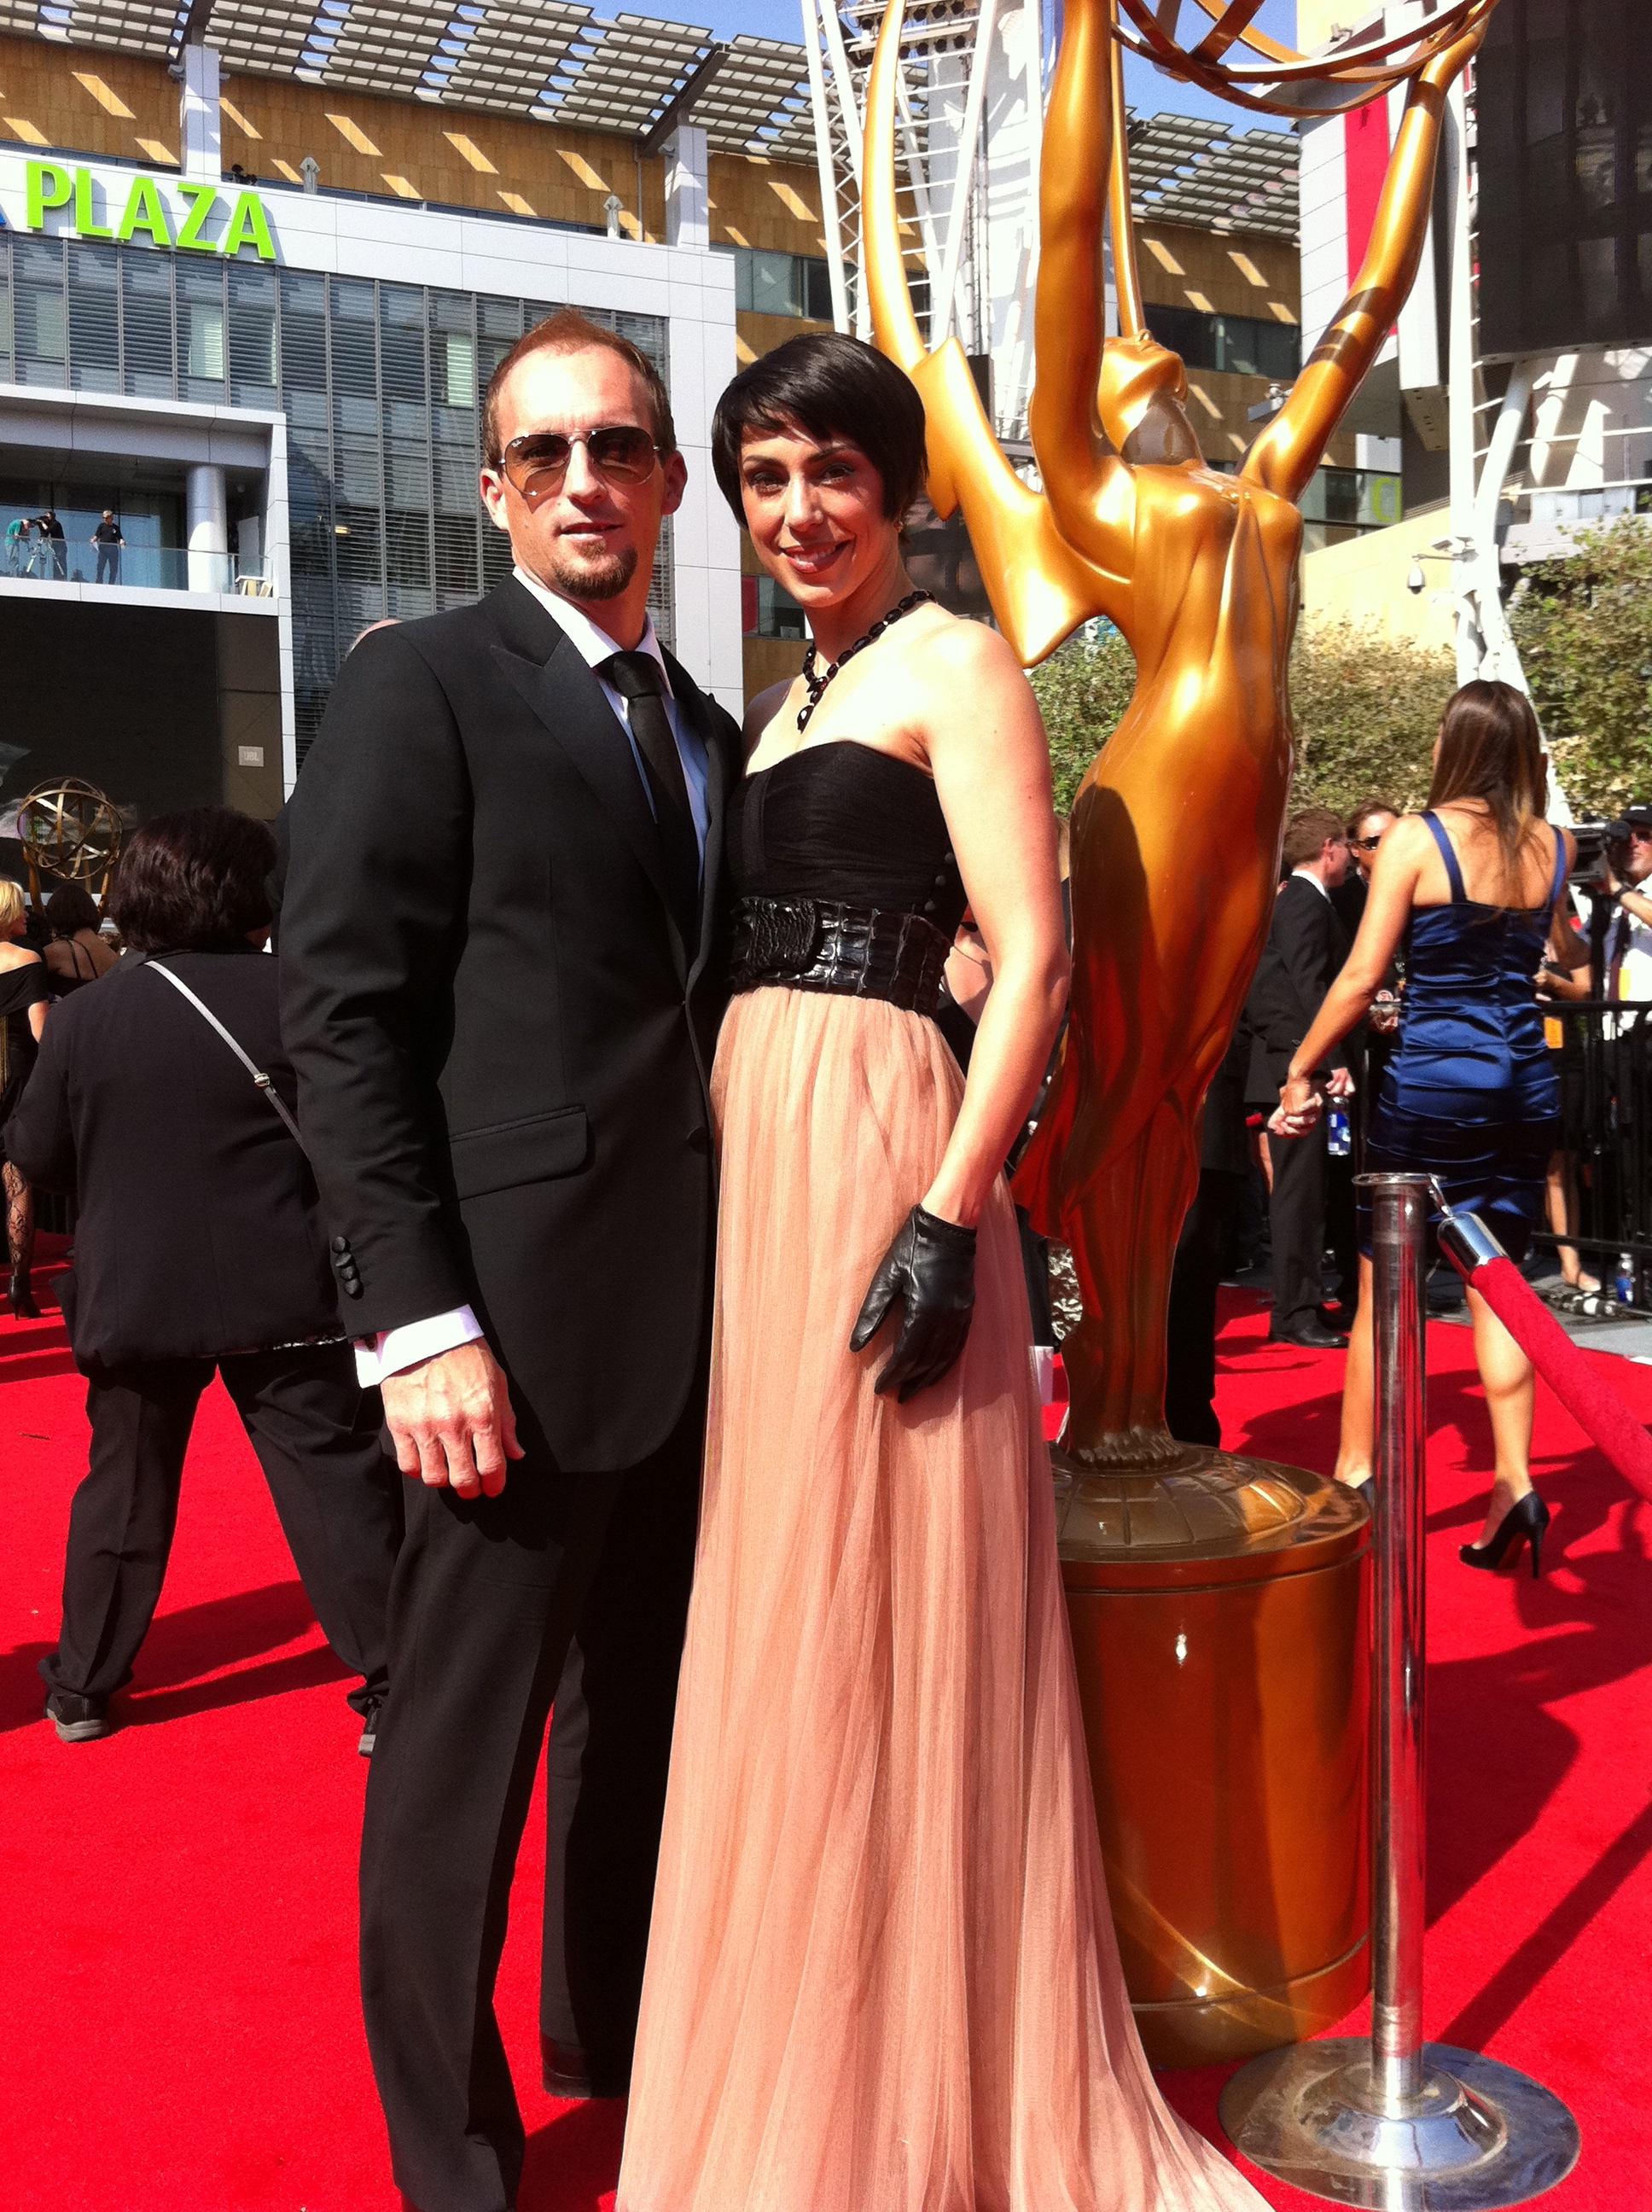 Al & E on the Red carpet @ The Creative Emmy Awards 2011